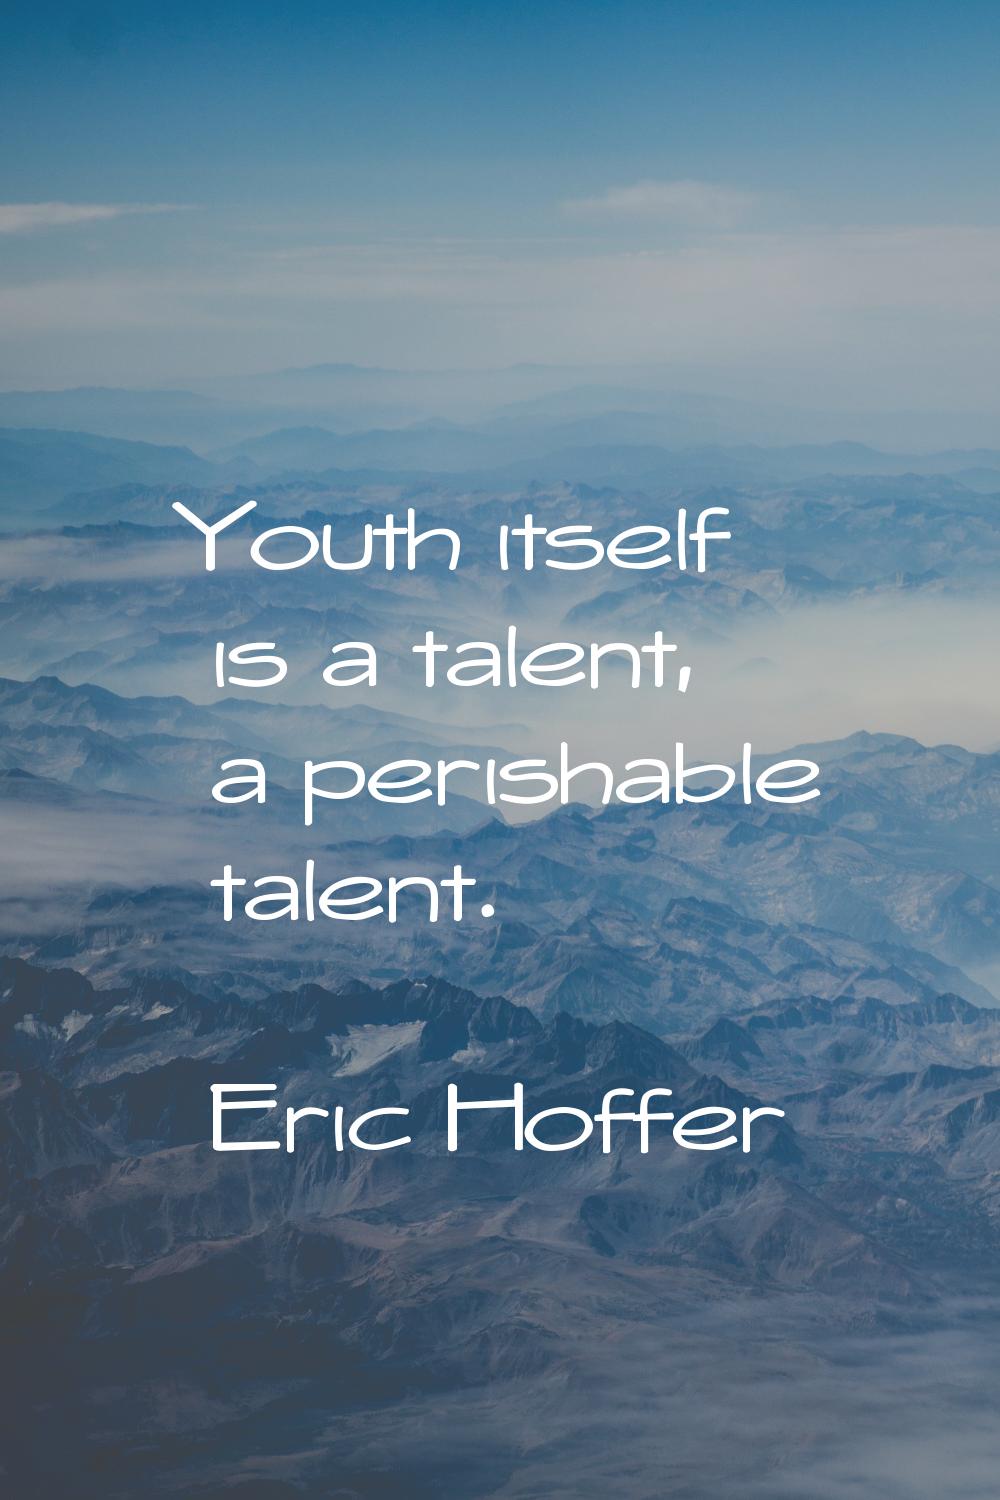 Youth itself is a talent, a perishable talent.